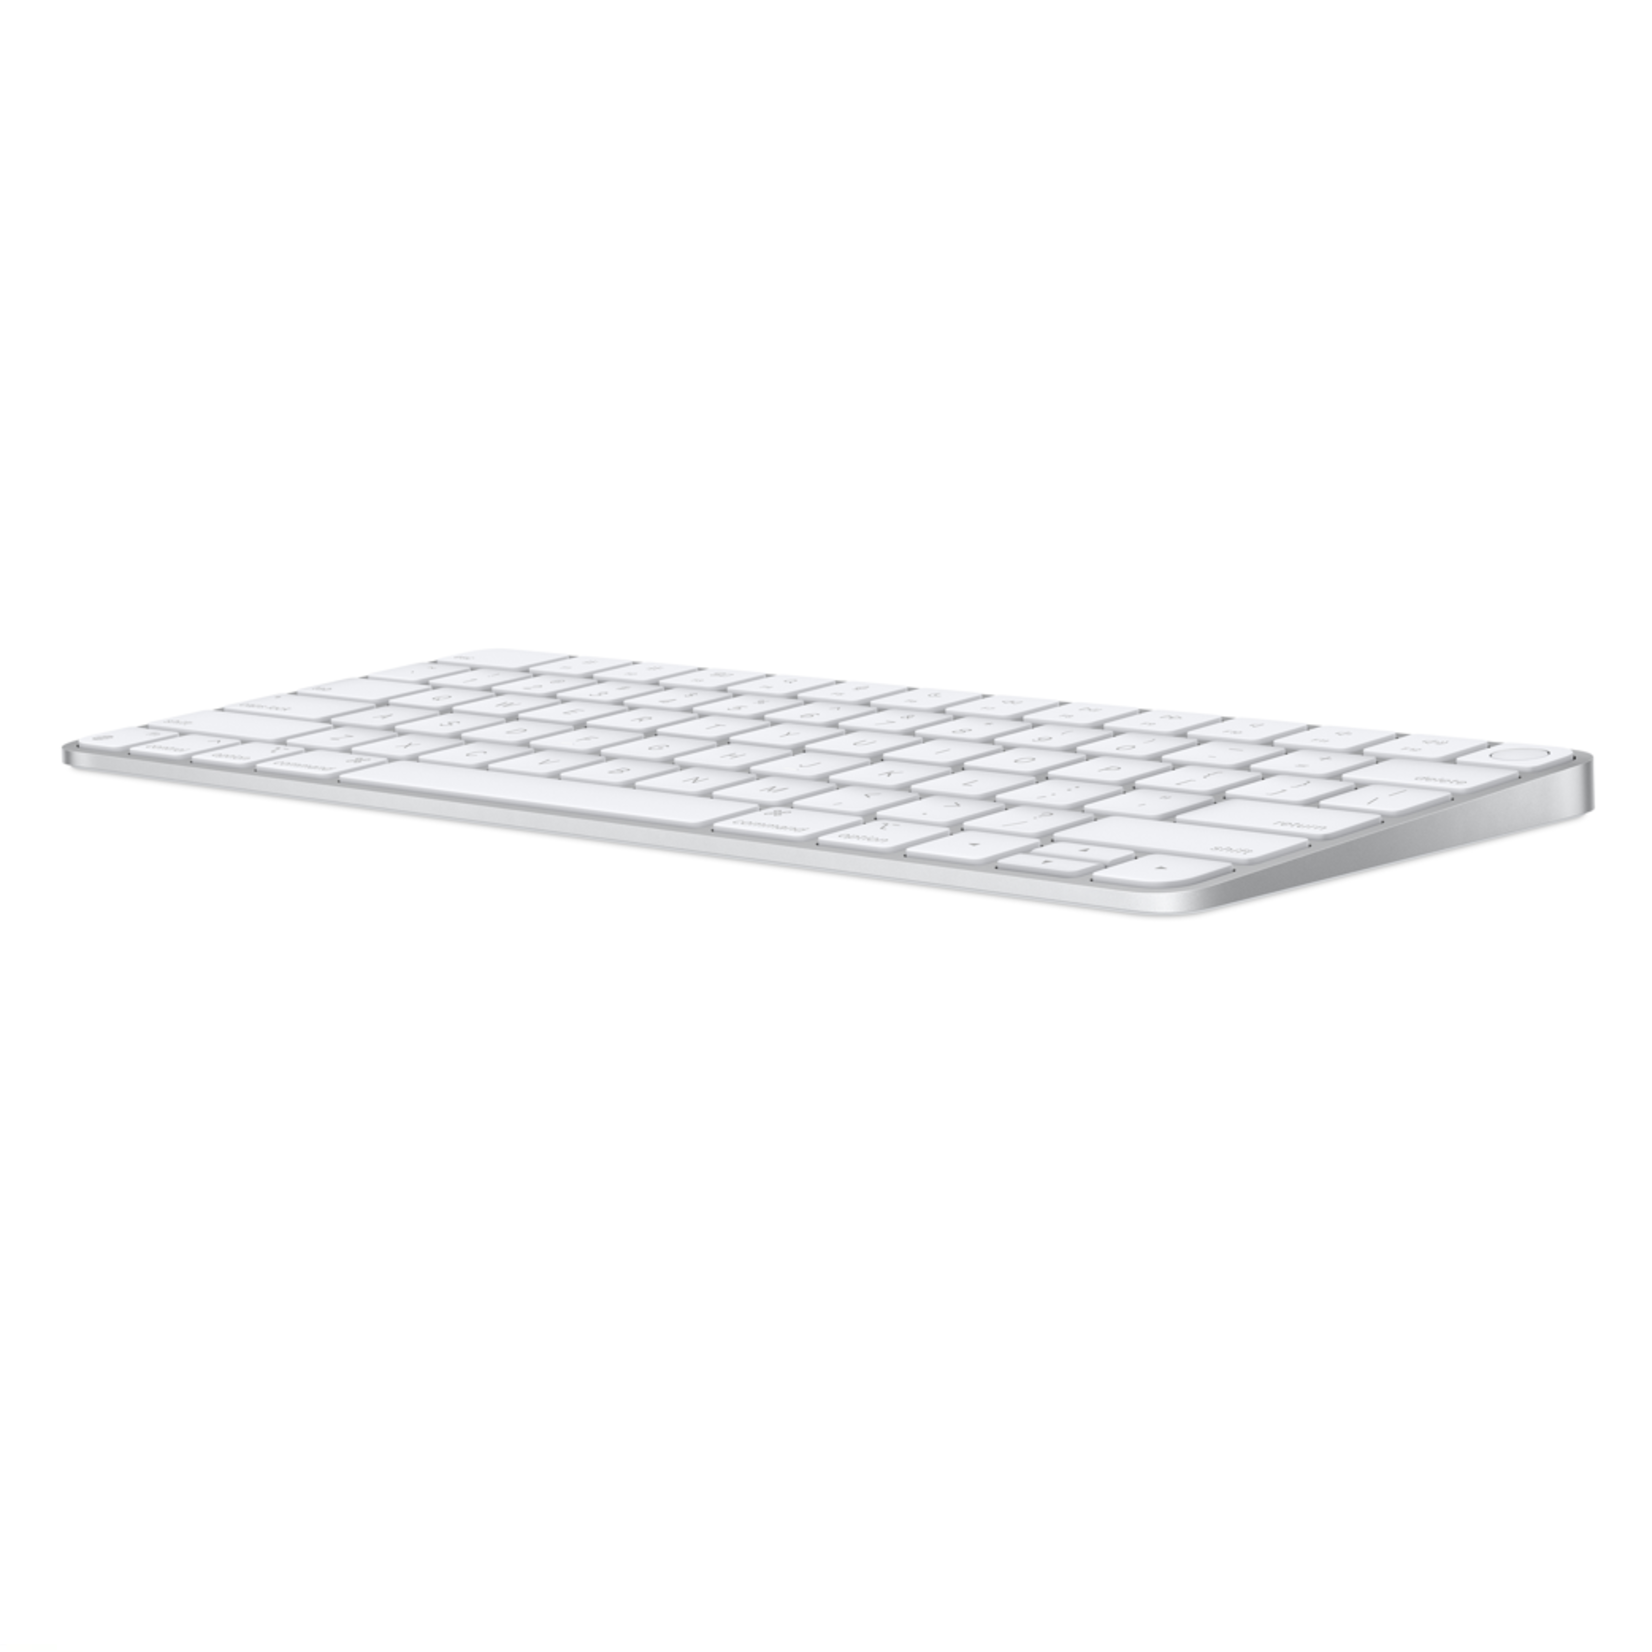 Apple Magic Keyboard with Touch ID for Mac computers with Apple silicon - US English